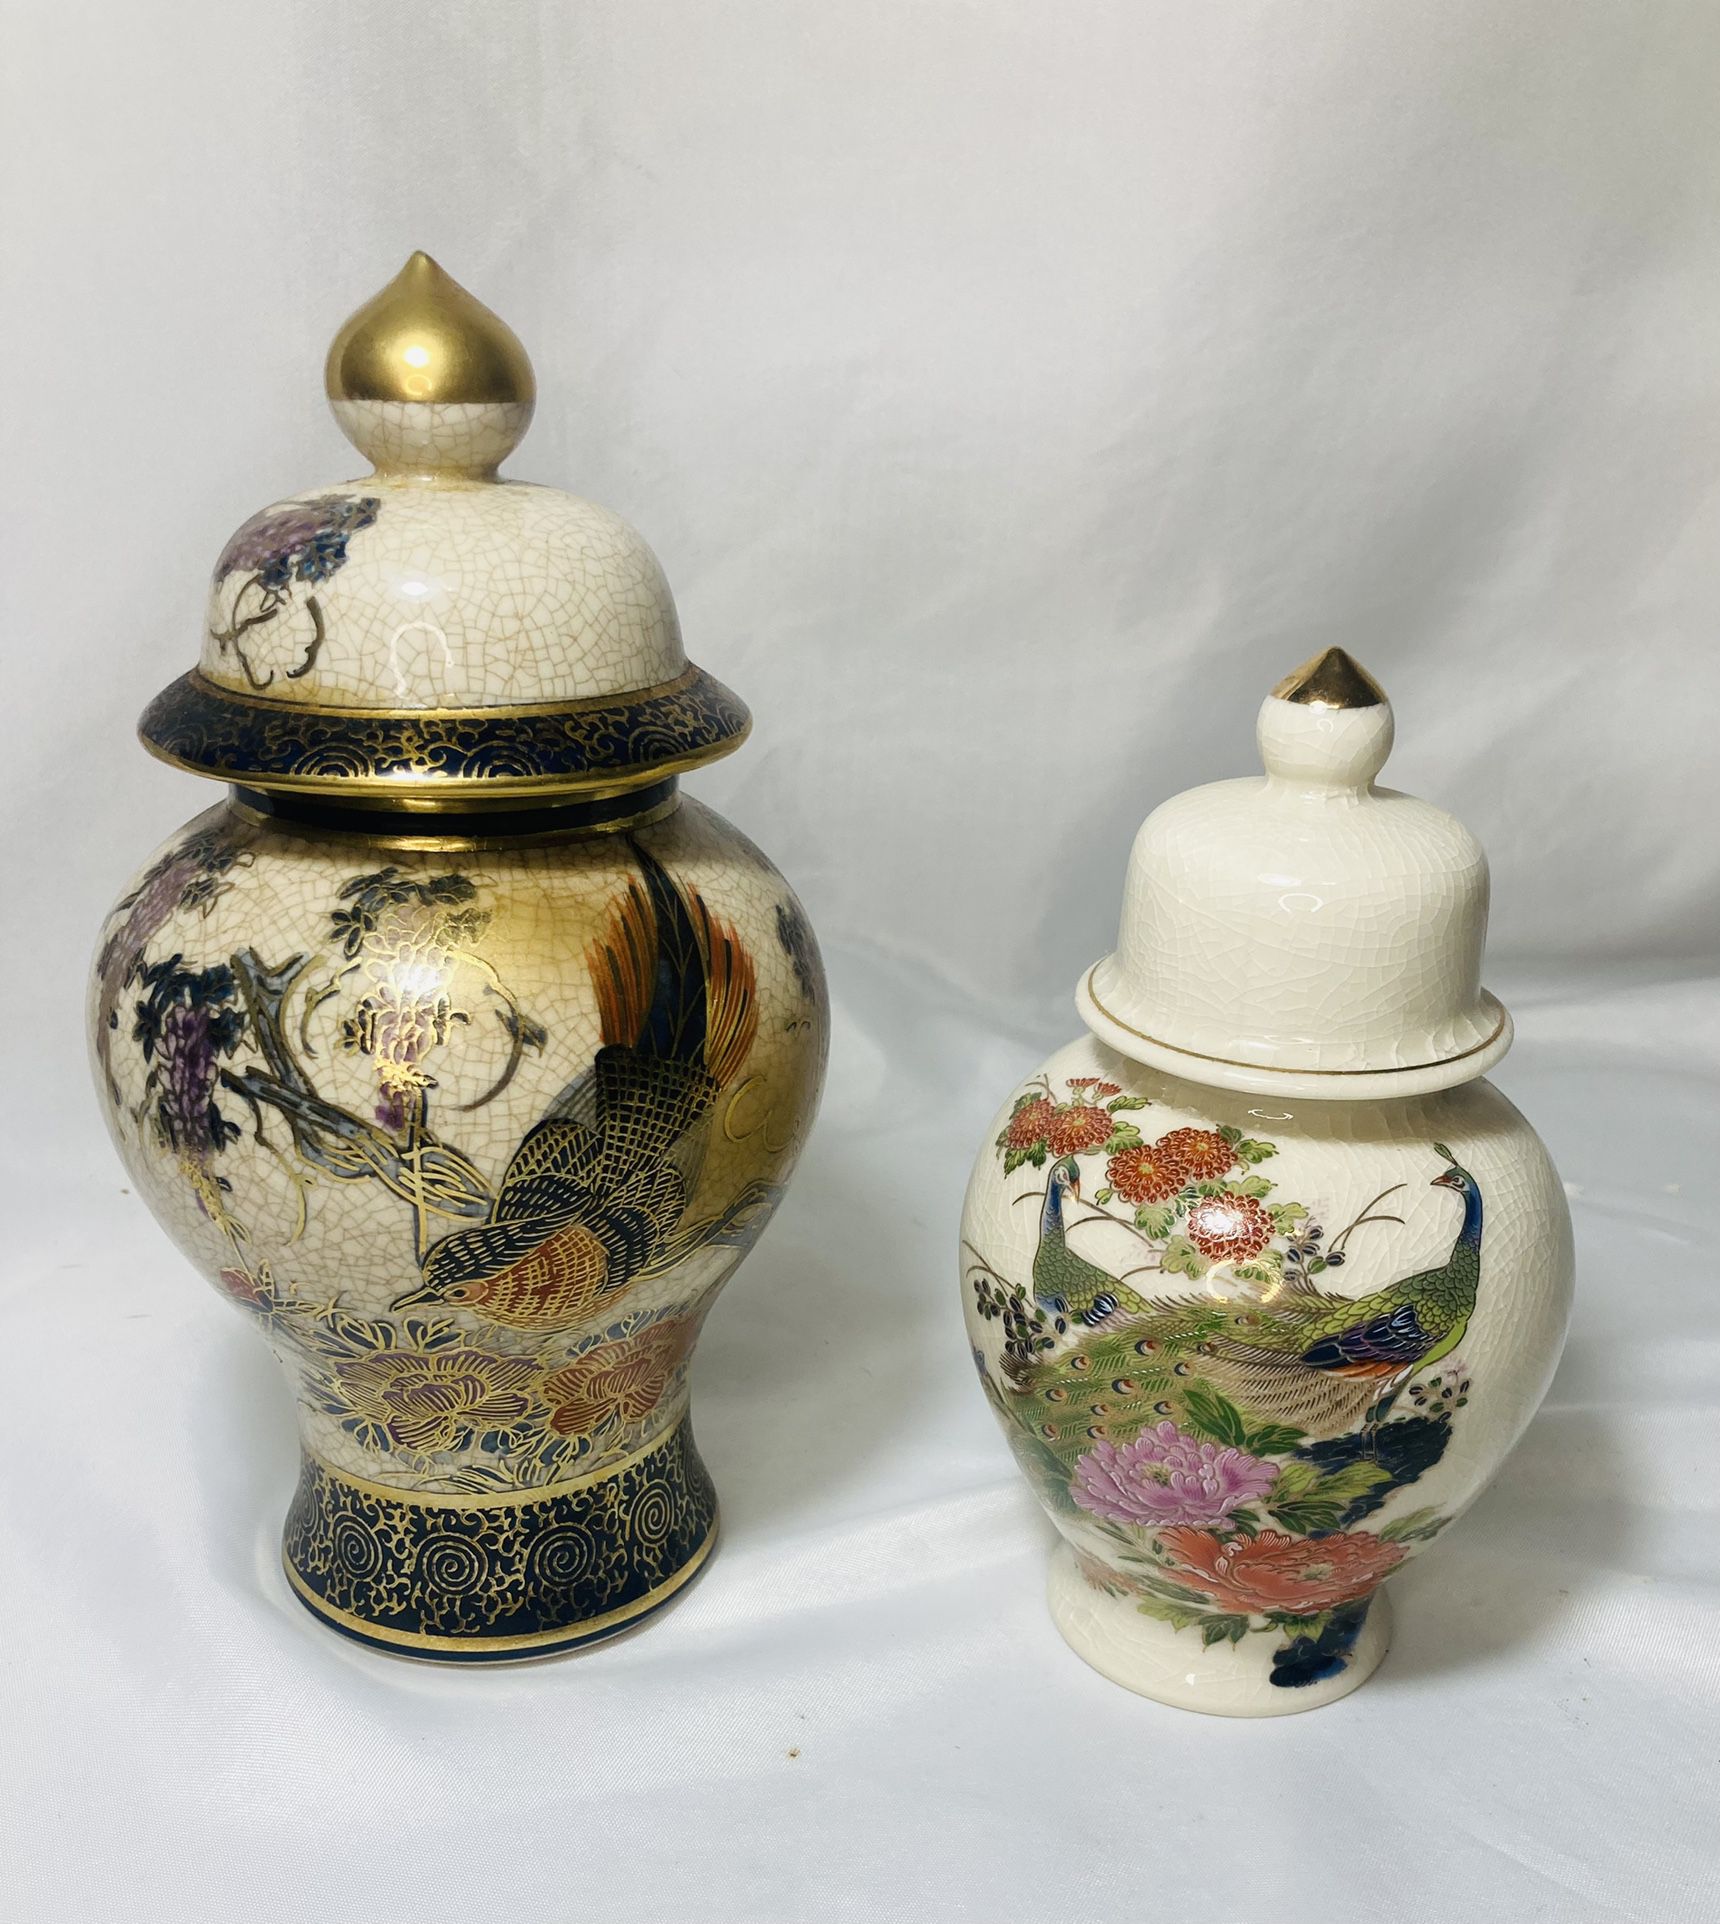 Satsuma ToyoJapanese Ginger Jar Goldwith Floral and Bird Vase Ginger Jar with Lid Peacock